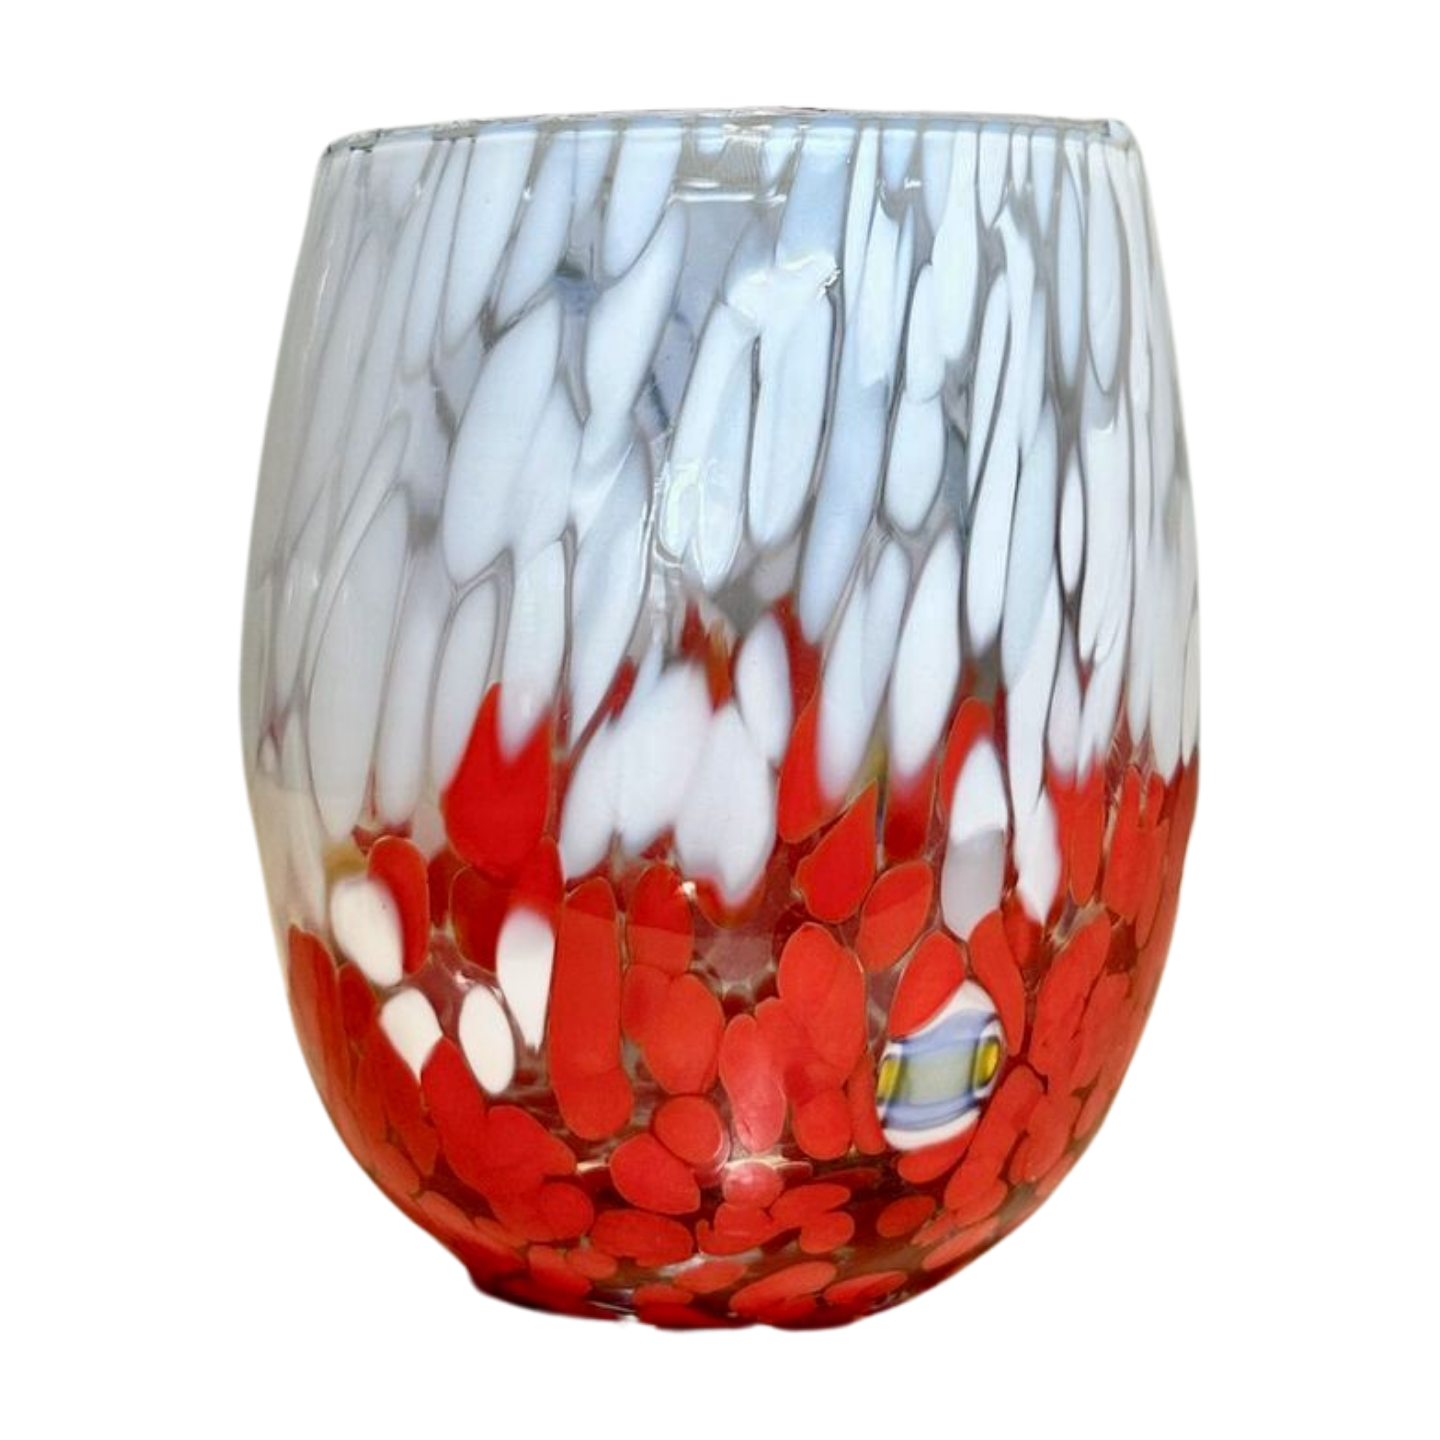 Stemless Murano Wine Glass, Two-Tone shown in red.